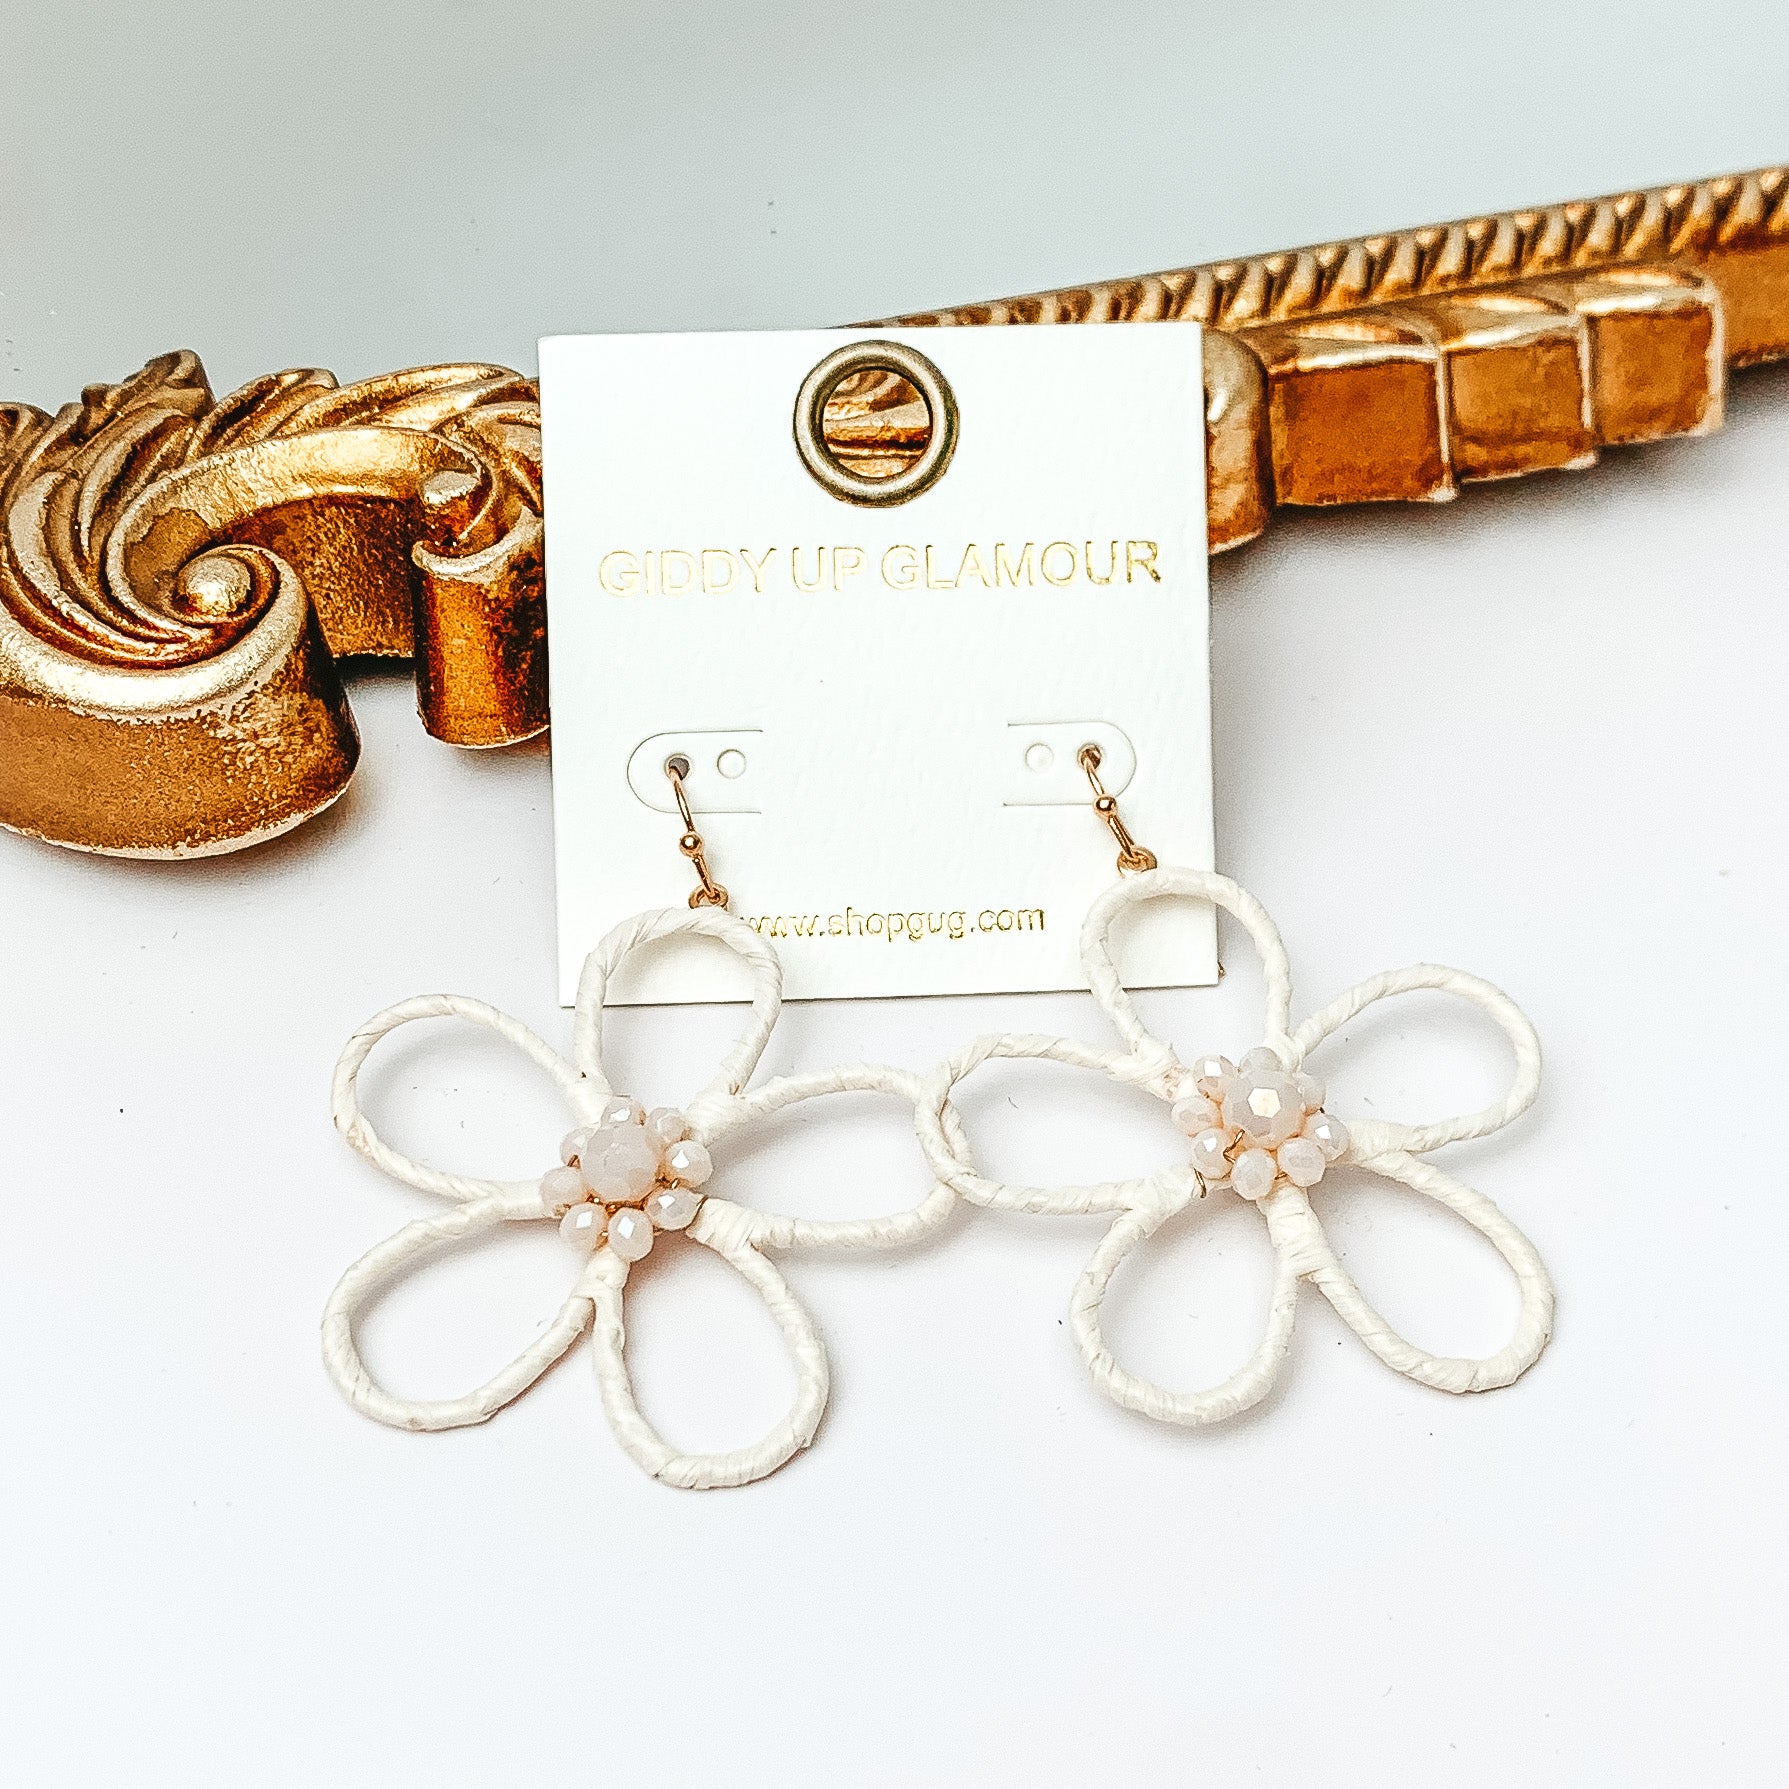 Pictured are gold fish hook earrings with a flower outline pendant. This pendant is ivory and has center ivory crystals. These earrings are pictured in front of a gold mirror on a white background. 